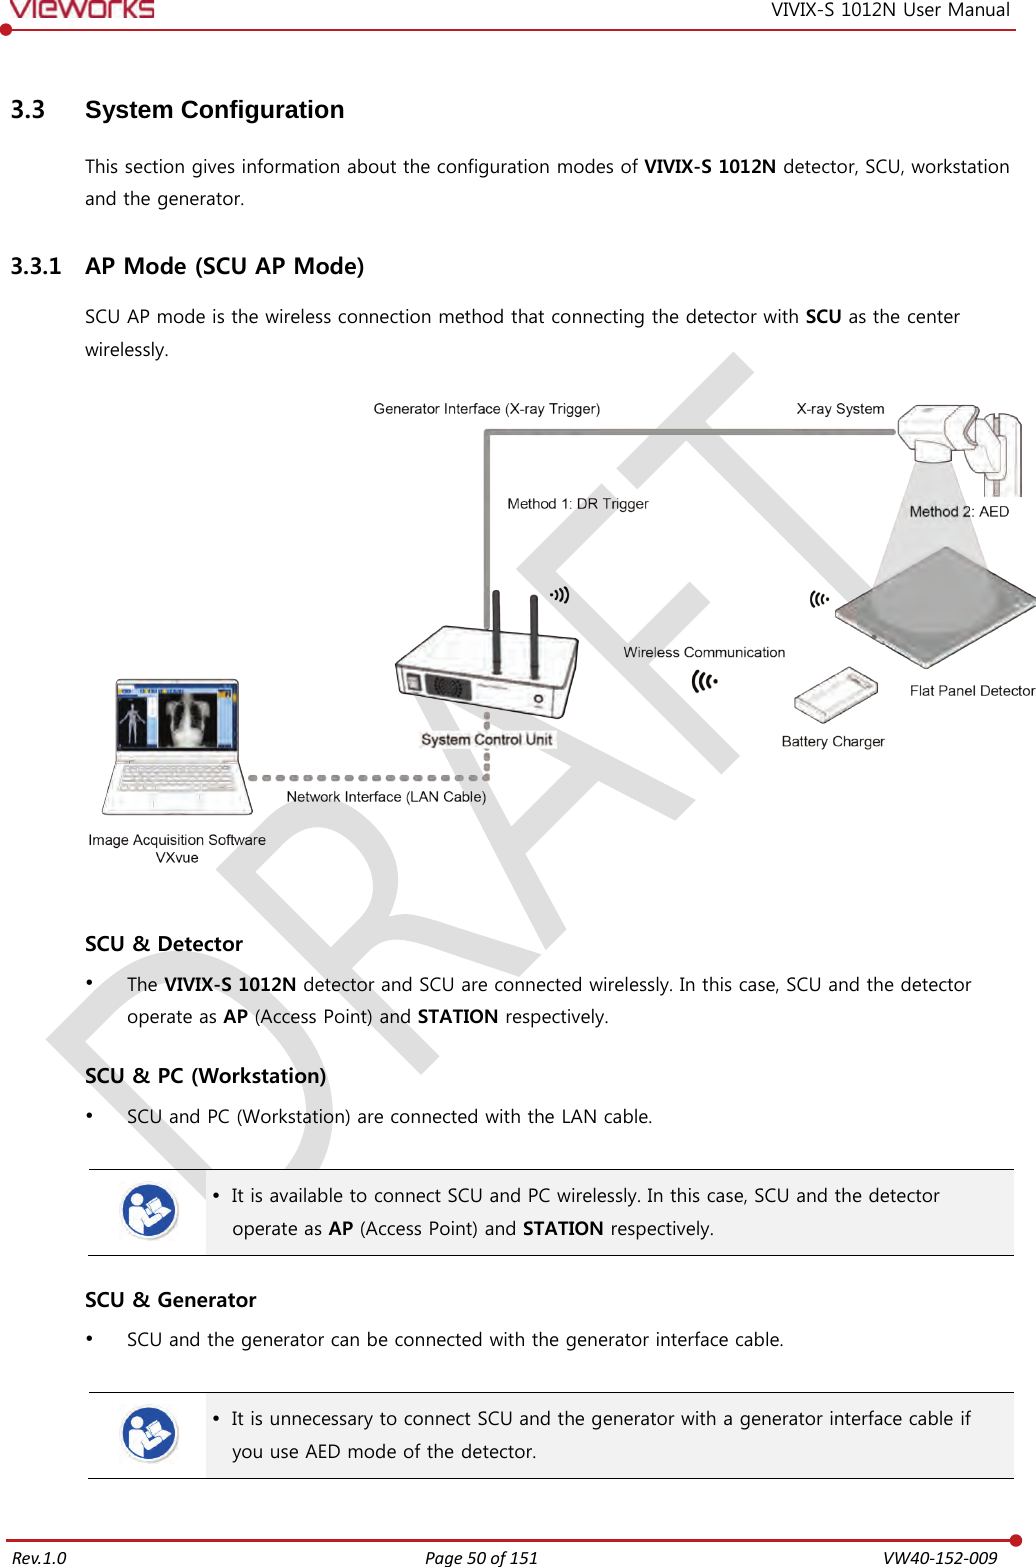   Rev.1.0 Page 50 of 151  VW40-152-009 VIVIX-S 1012N User Manual 3.3 System Configuration This section gives information about the configuration modes of VIVIX-S 1012N detector, SCU, workstation and the generator. 3.3.1 AP Mode (SCU AP Mode) SCU AP mode is the wireless connection method that connecting the detector with SCU as the center wirelessly.     SCU &amp; Detector  The VIVIX-S 1012N detector and SCU are connected wirelessly. In this case, SCU and the detector operate as AP (Access Point) and STATION respectively.  SCU &amp; PC (Workstation)  SCU and PC (Workstation) are connected with the LAN cable.    It is available to connect SCU and PC wirelessly. In this case, SCU and the detector operate as AP (Access Point) and STATION respectively.  SCU &amp; Generator  SCU and the generator can be connected with the generator interface cable.    It is unnecessary to connect SCU and the generator with a generator interface cable if you use AED mode of the detector.  